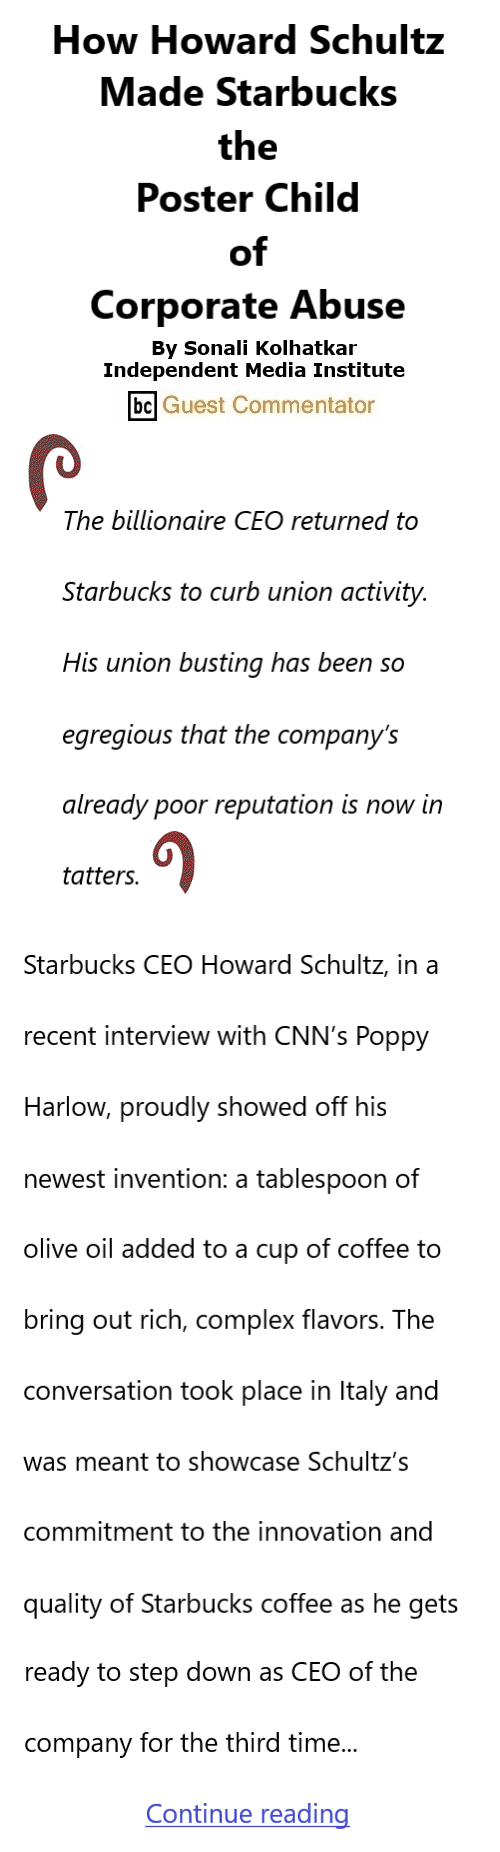 BlackCommentator.com Mar 2, 2023 - Issue 945: How Howard Schultz Made Starbucks the Poster Child of Corporate Abuse By Sonali Kolhatkar, Independent Media Institute, BC Guest Commentator